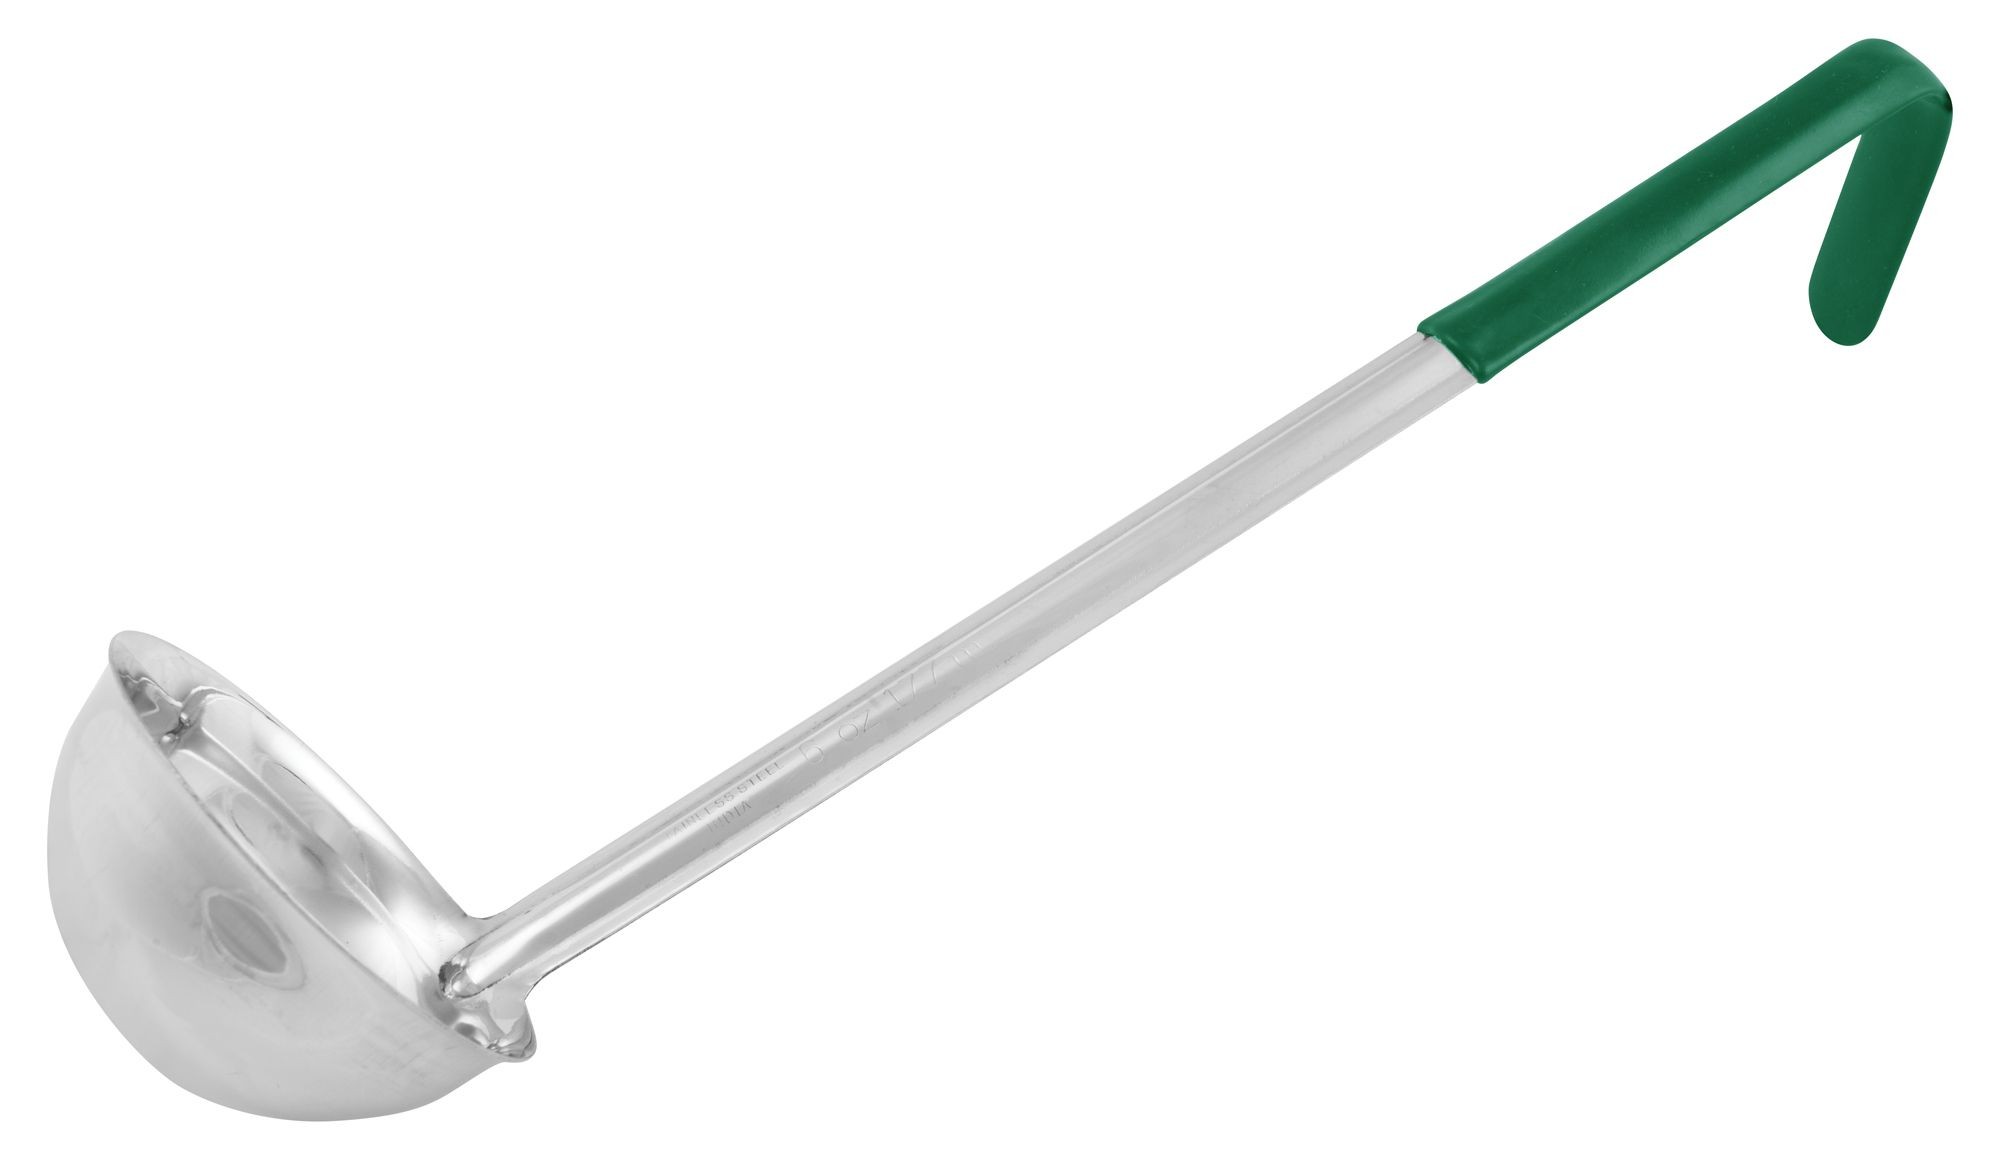 Winco LDCN-6 Stainless Steel 6 oz. One-Piece Ladle with Green Handle